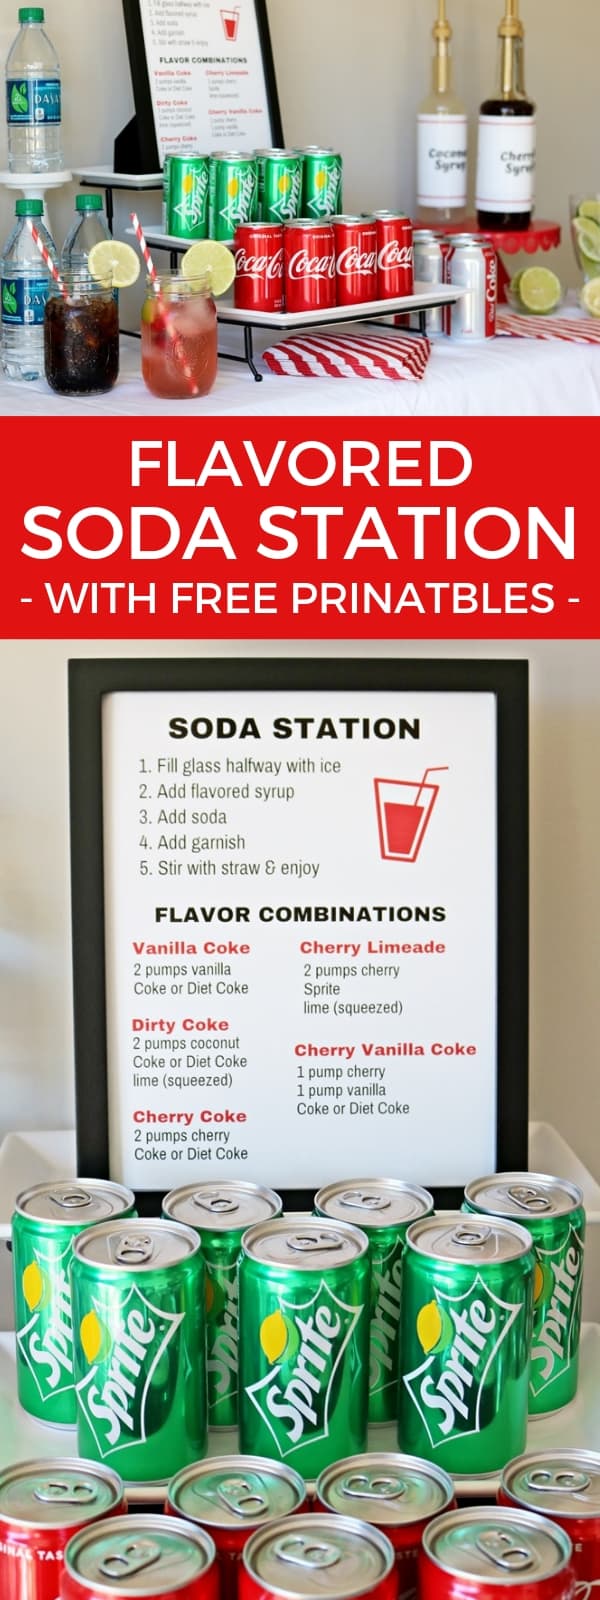 Set up a flavored soda station for your party or event with these beverage station tips and free printable syrup bottle labels and soda station sign.